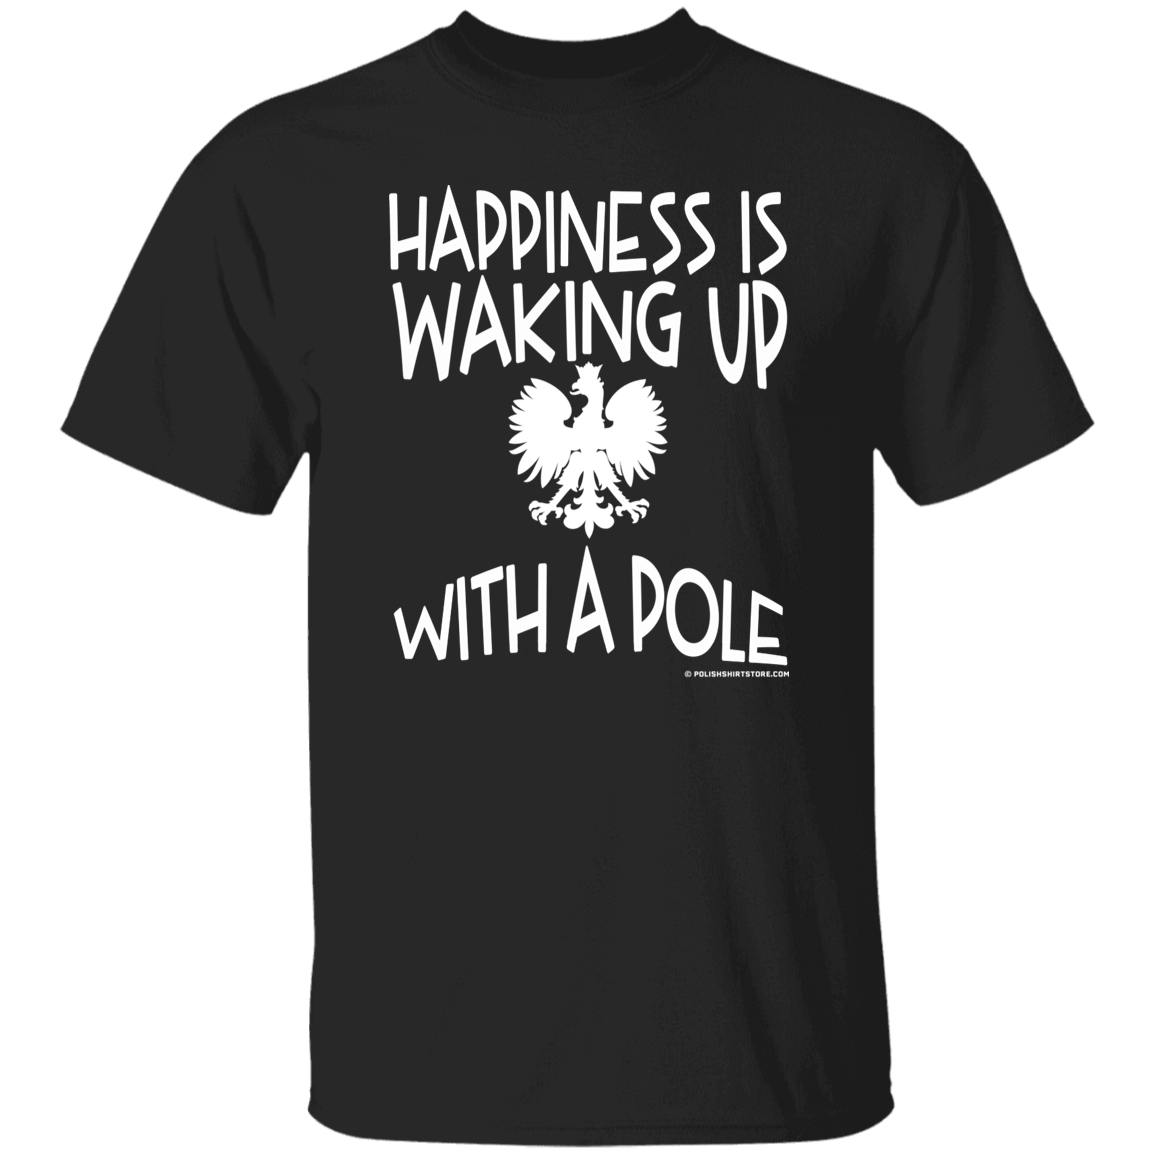 Happiness Is Waking Up With A Pole Apparel CustomCat G500 5.3 oz. T-Shirt Black S